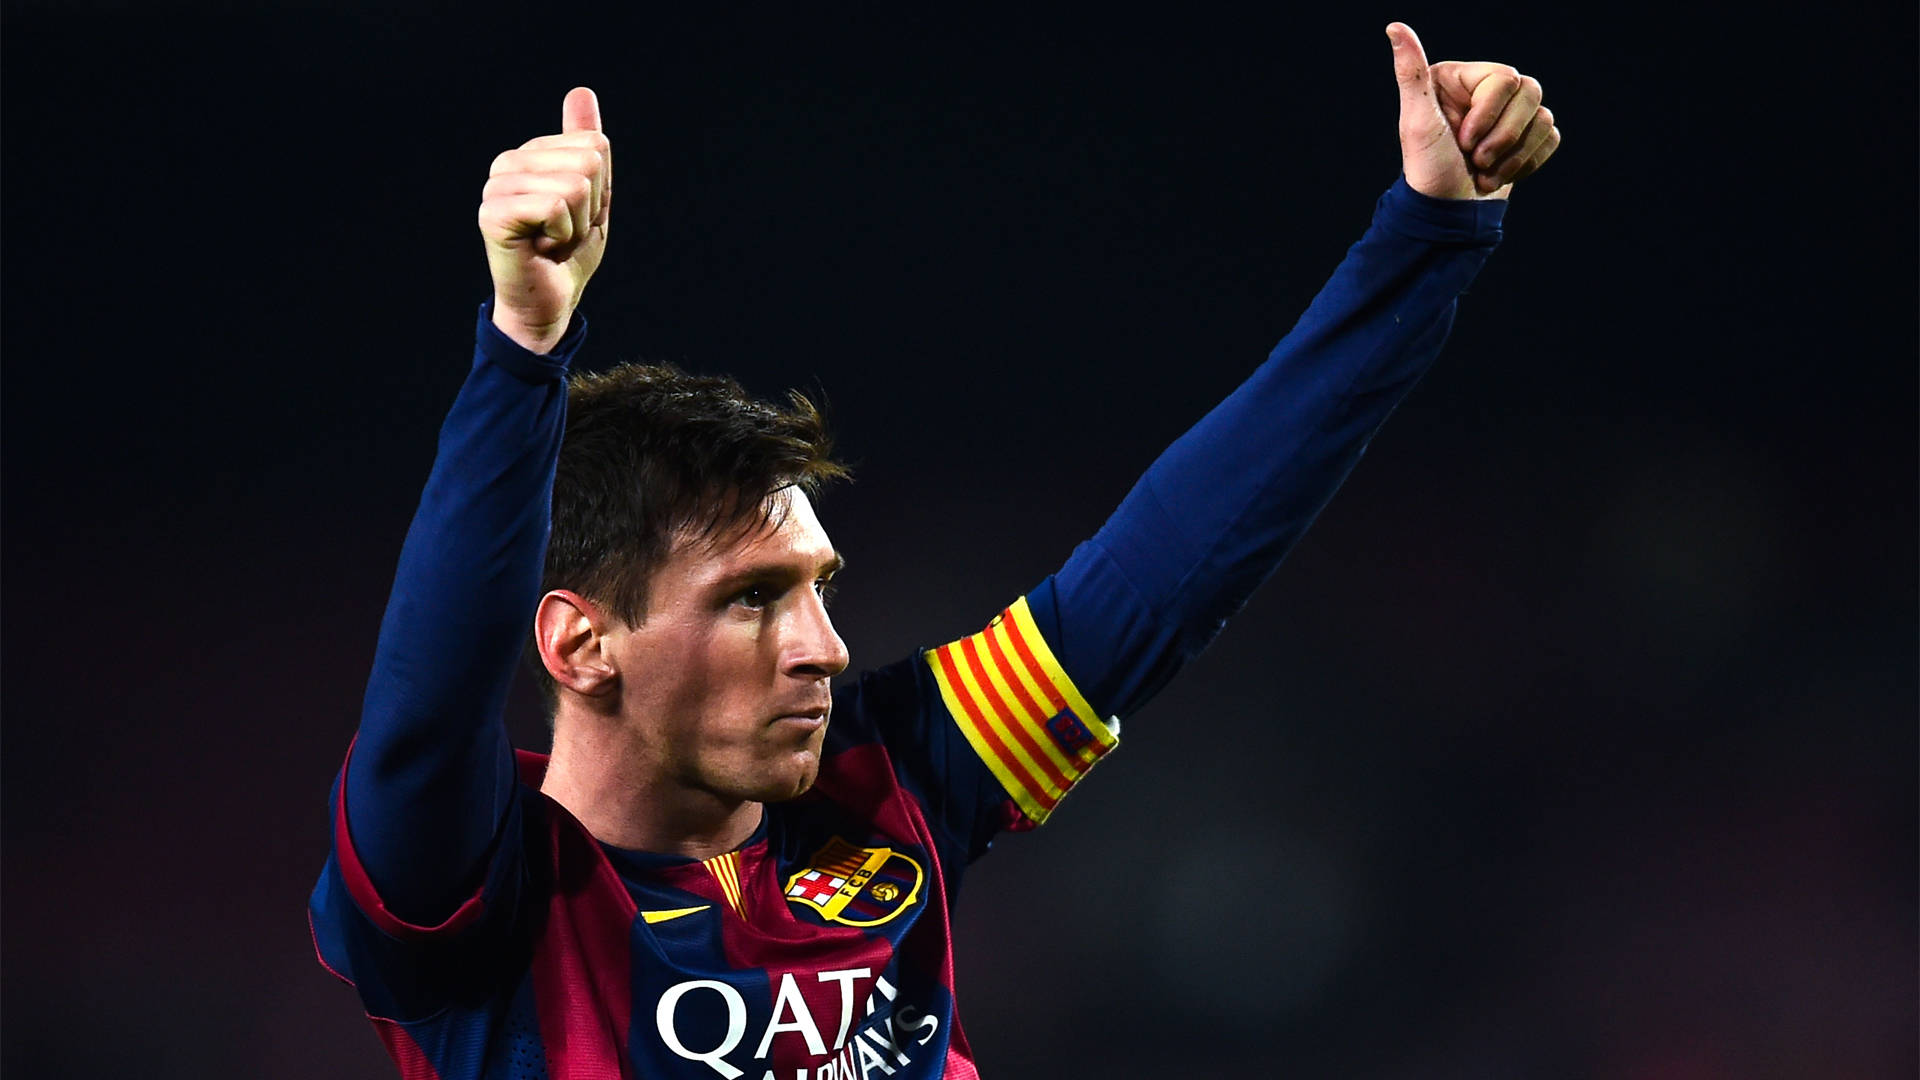 Messi Two Thumbs Up Background